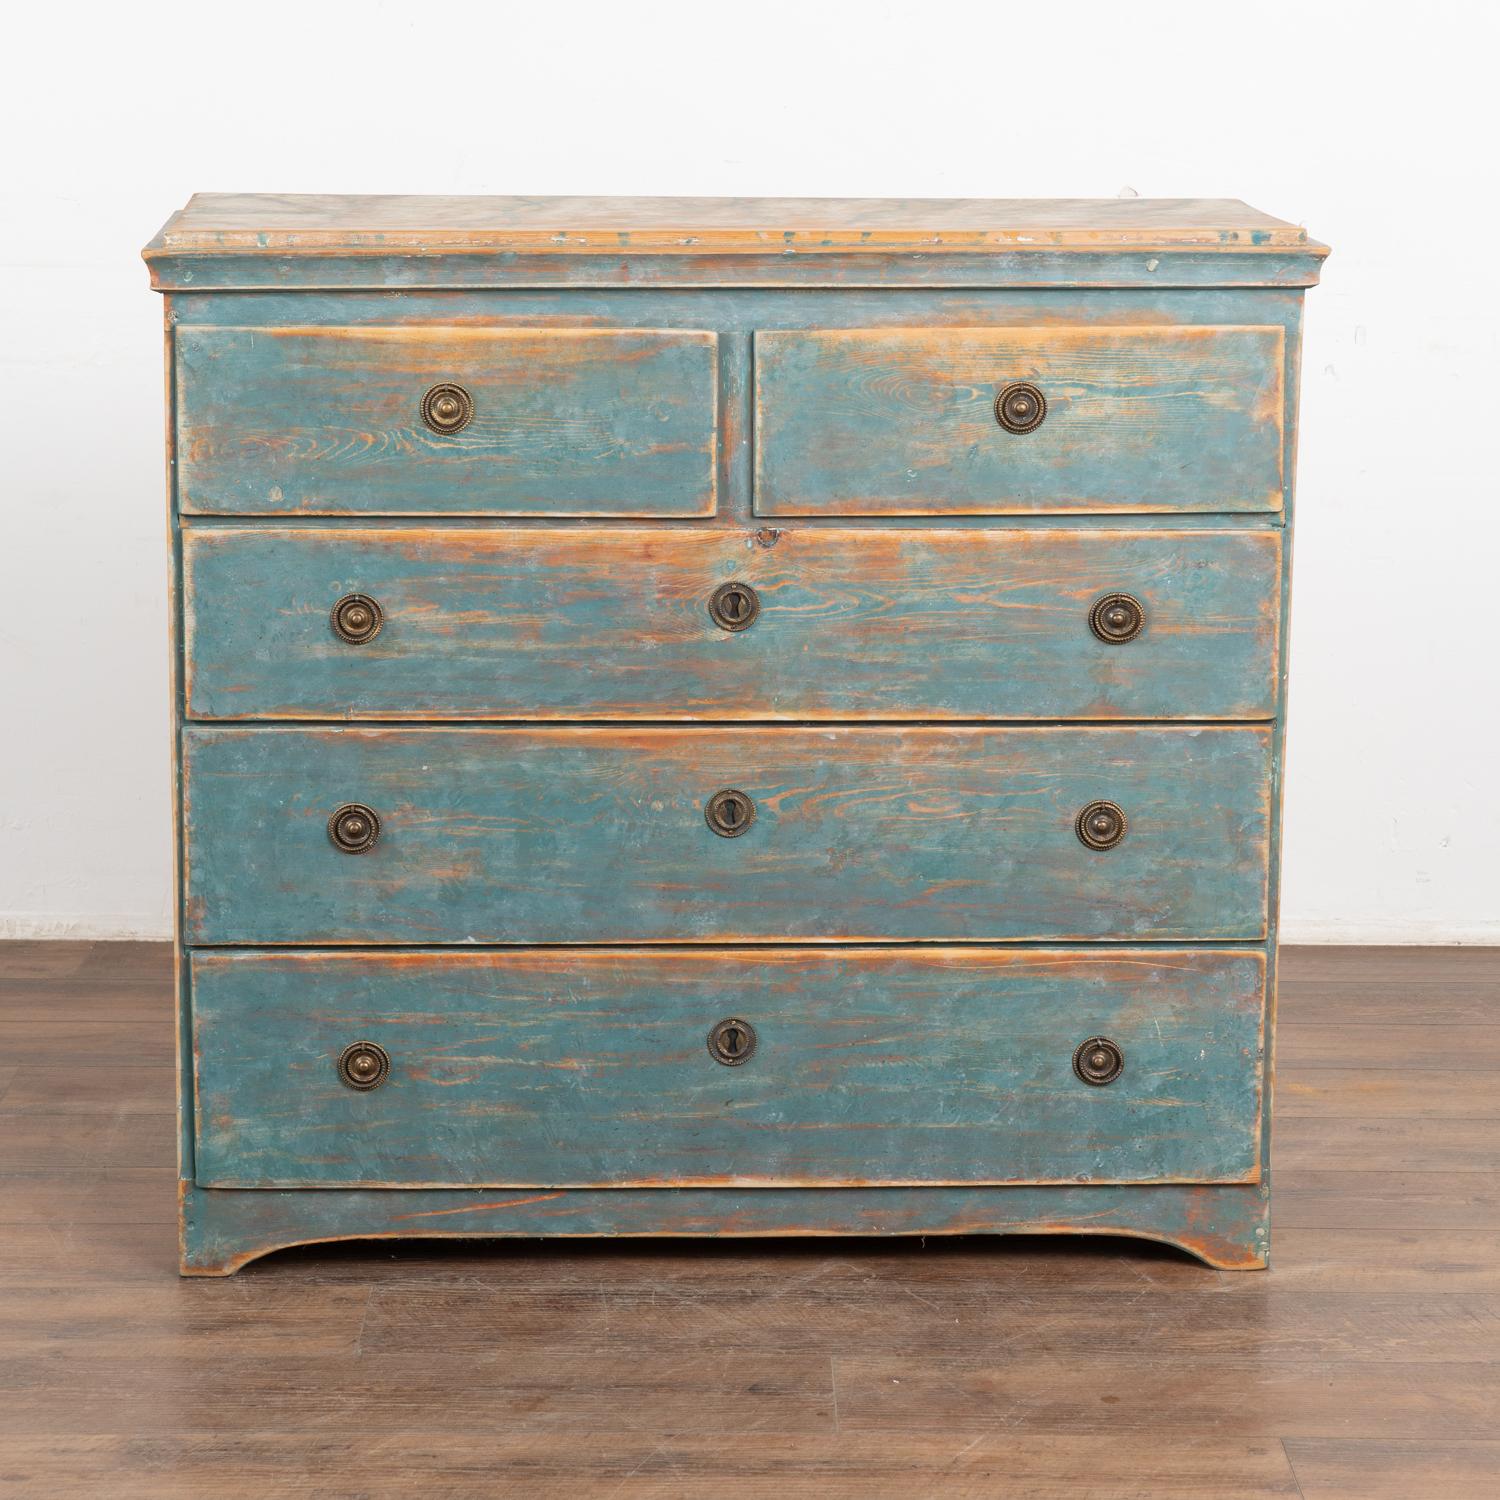 Original Blue Painted Swedish Pine Chest of drawers, circa 1800-20 In Good Condition In Round Top, TX